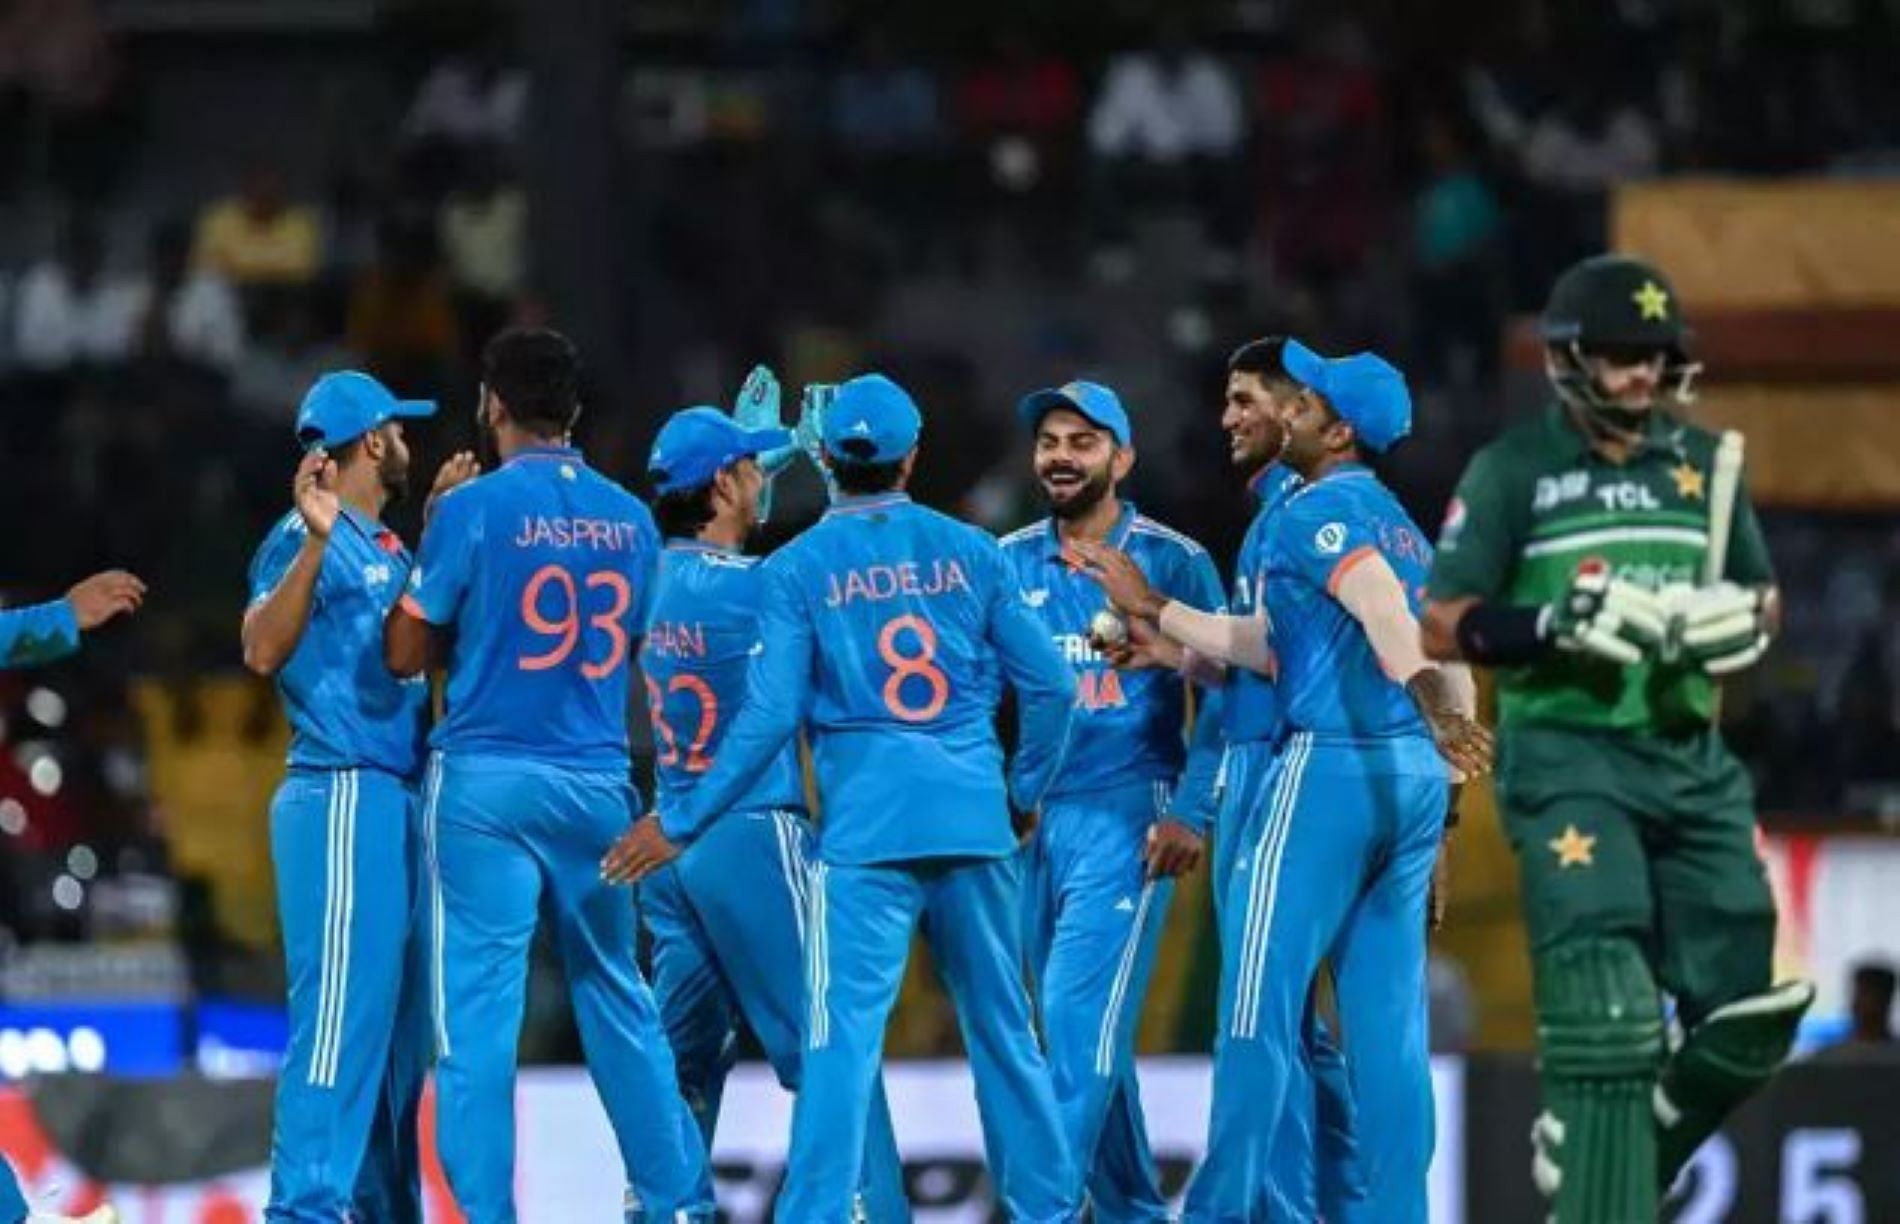 India has dominated Pakistan in the 50-over format recently.